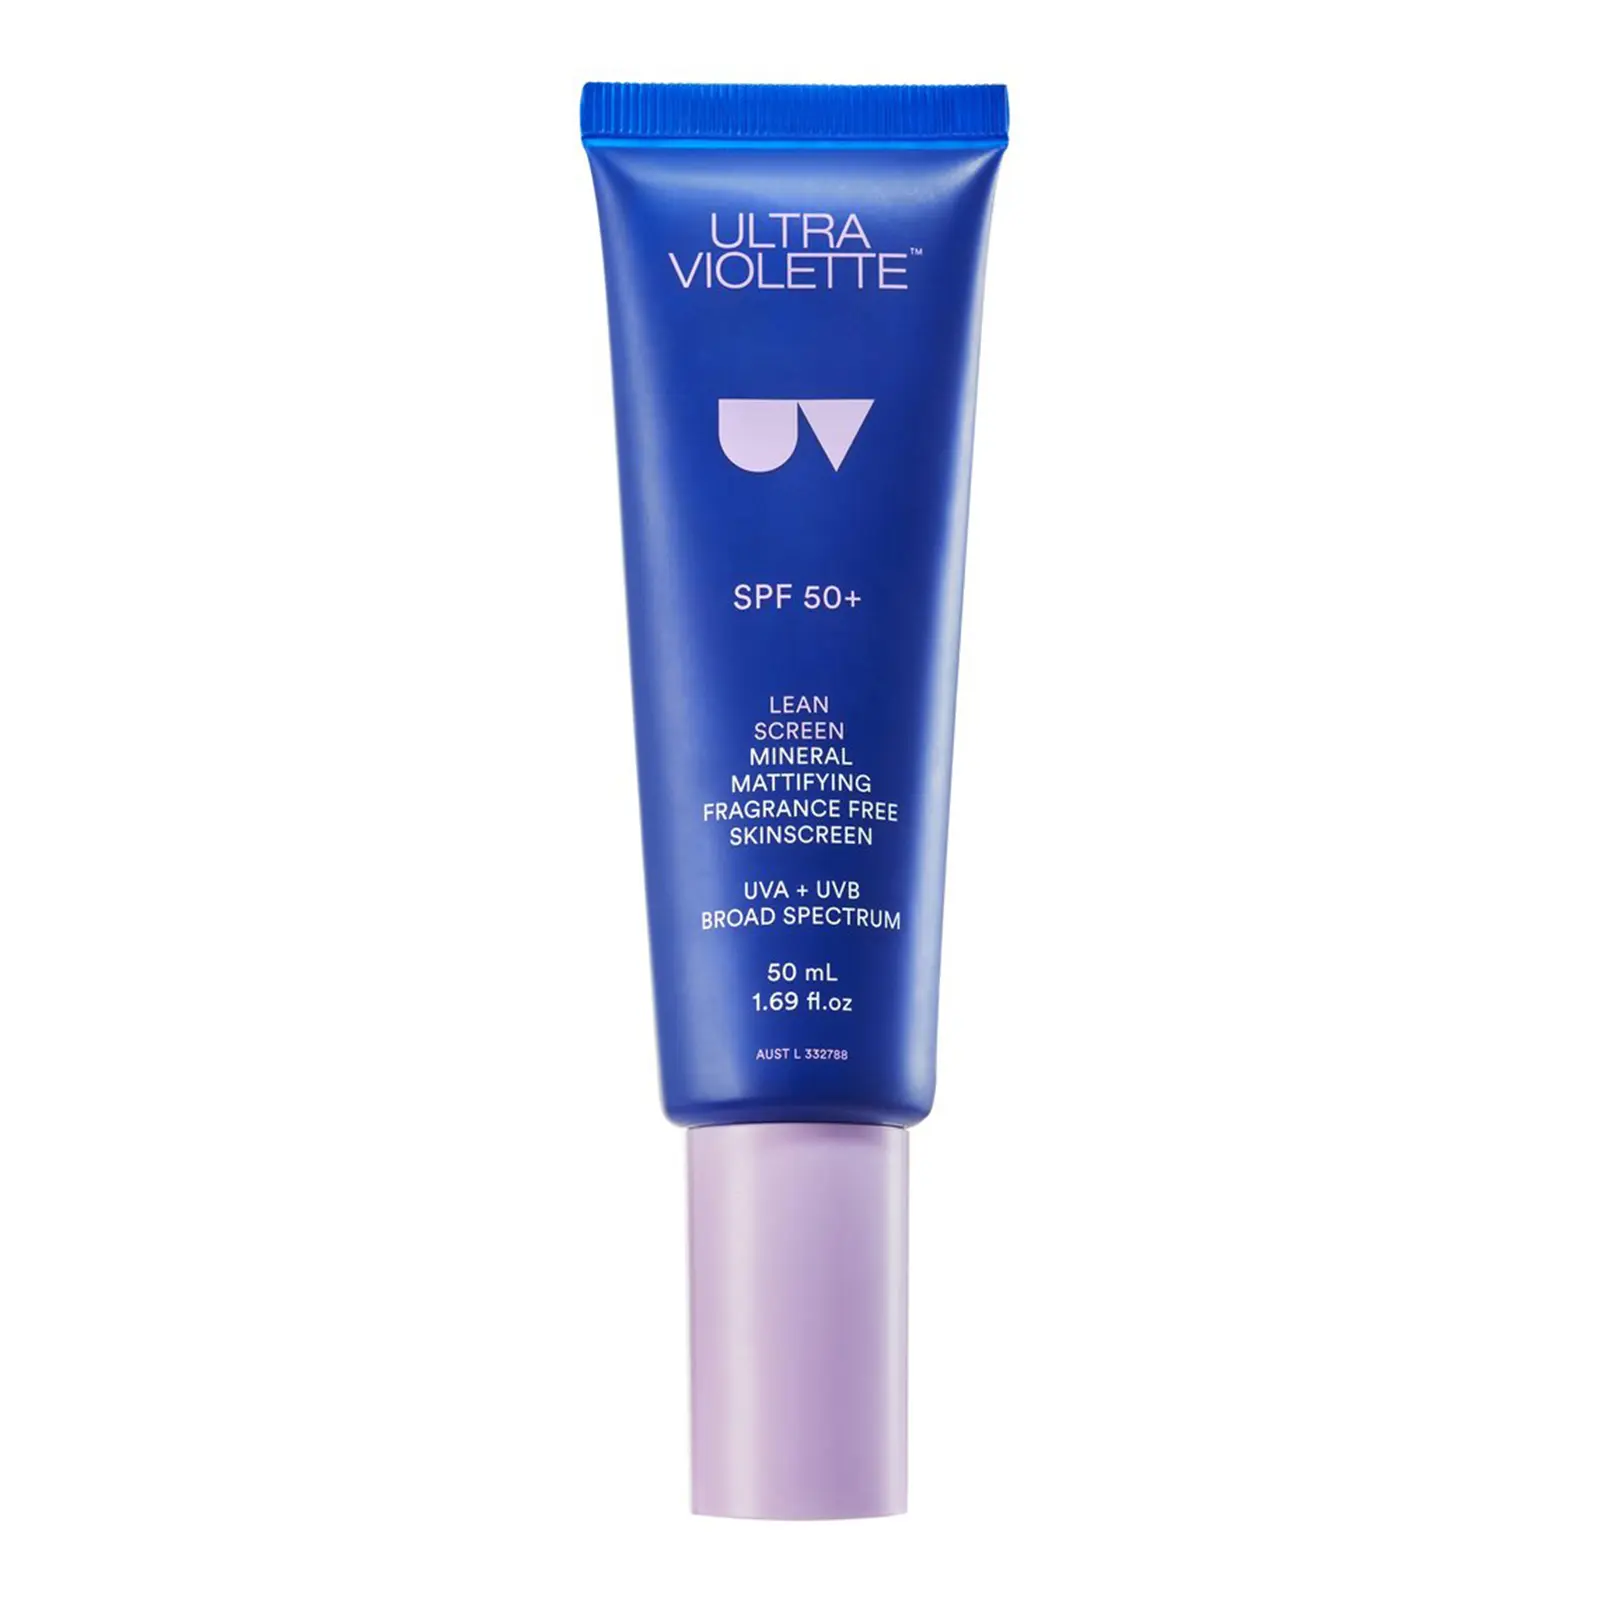 1220_Call-Time-On-Melanoma_Ultra-Violette-Lean-Screen-Mineral-Sunscreen-SPF50_OPT